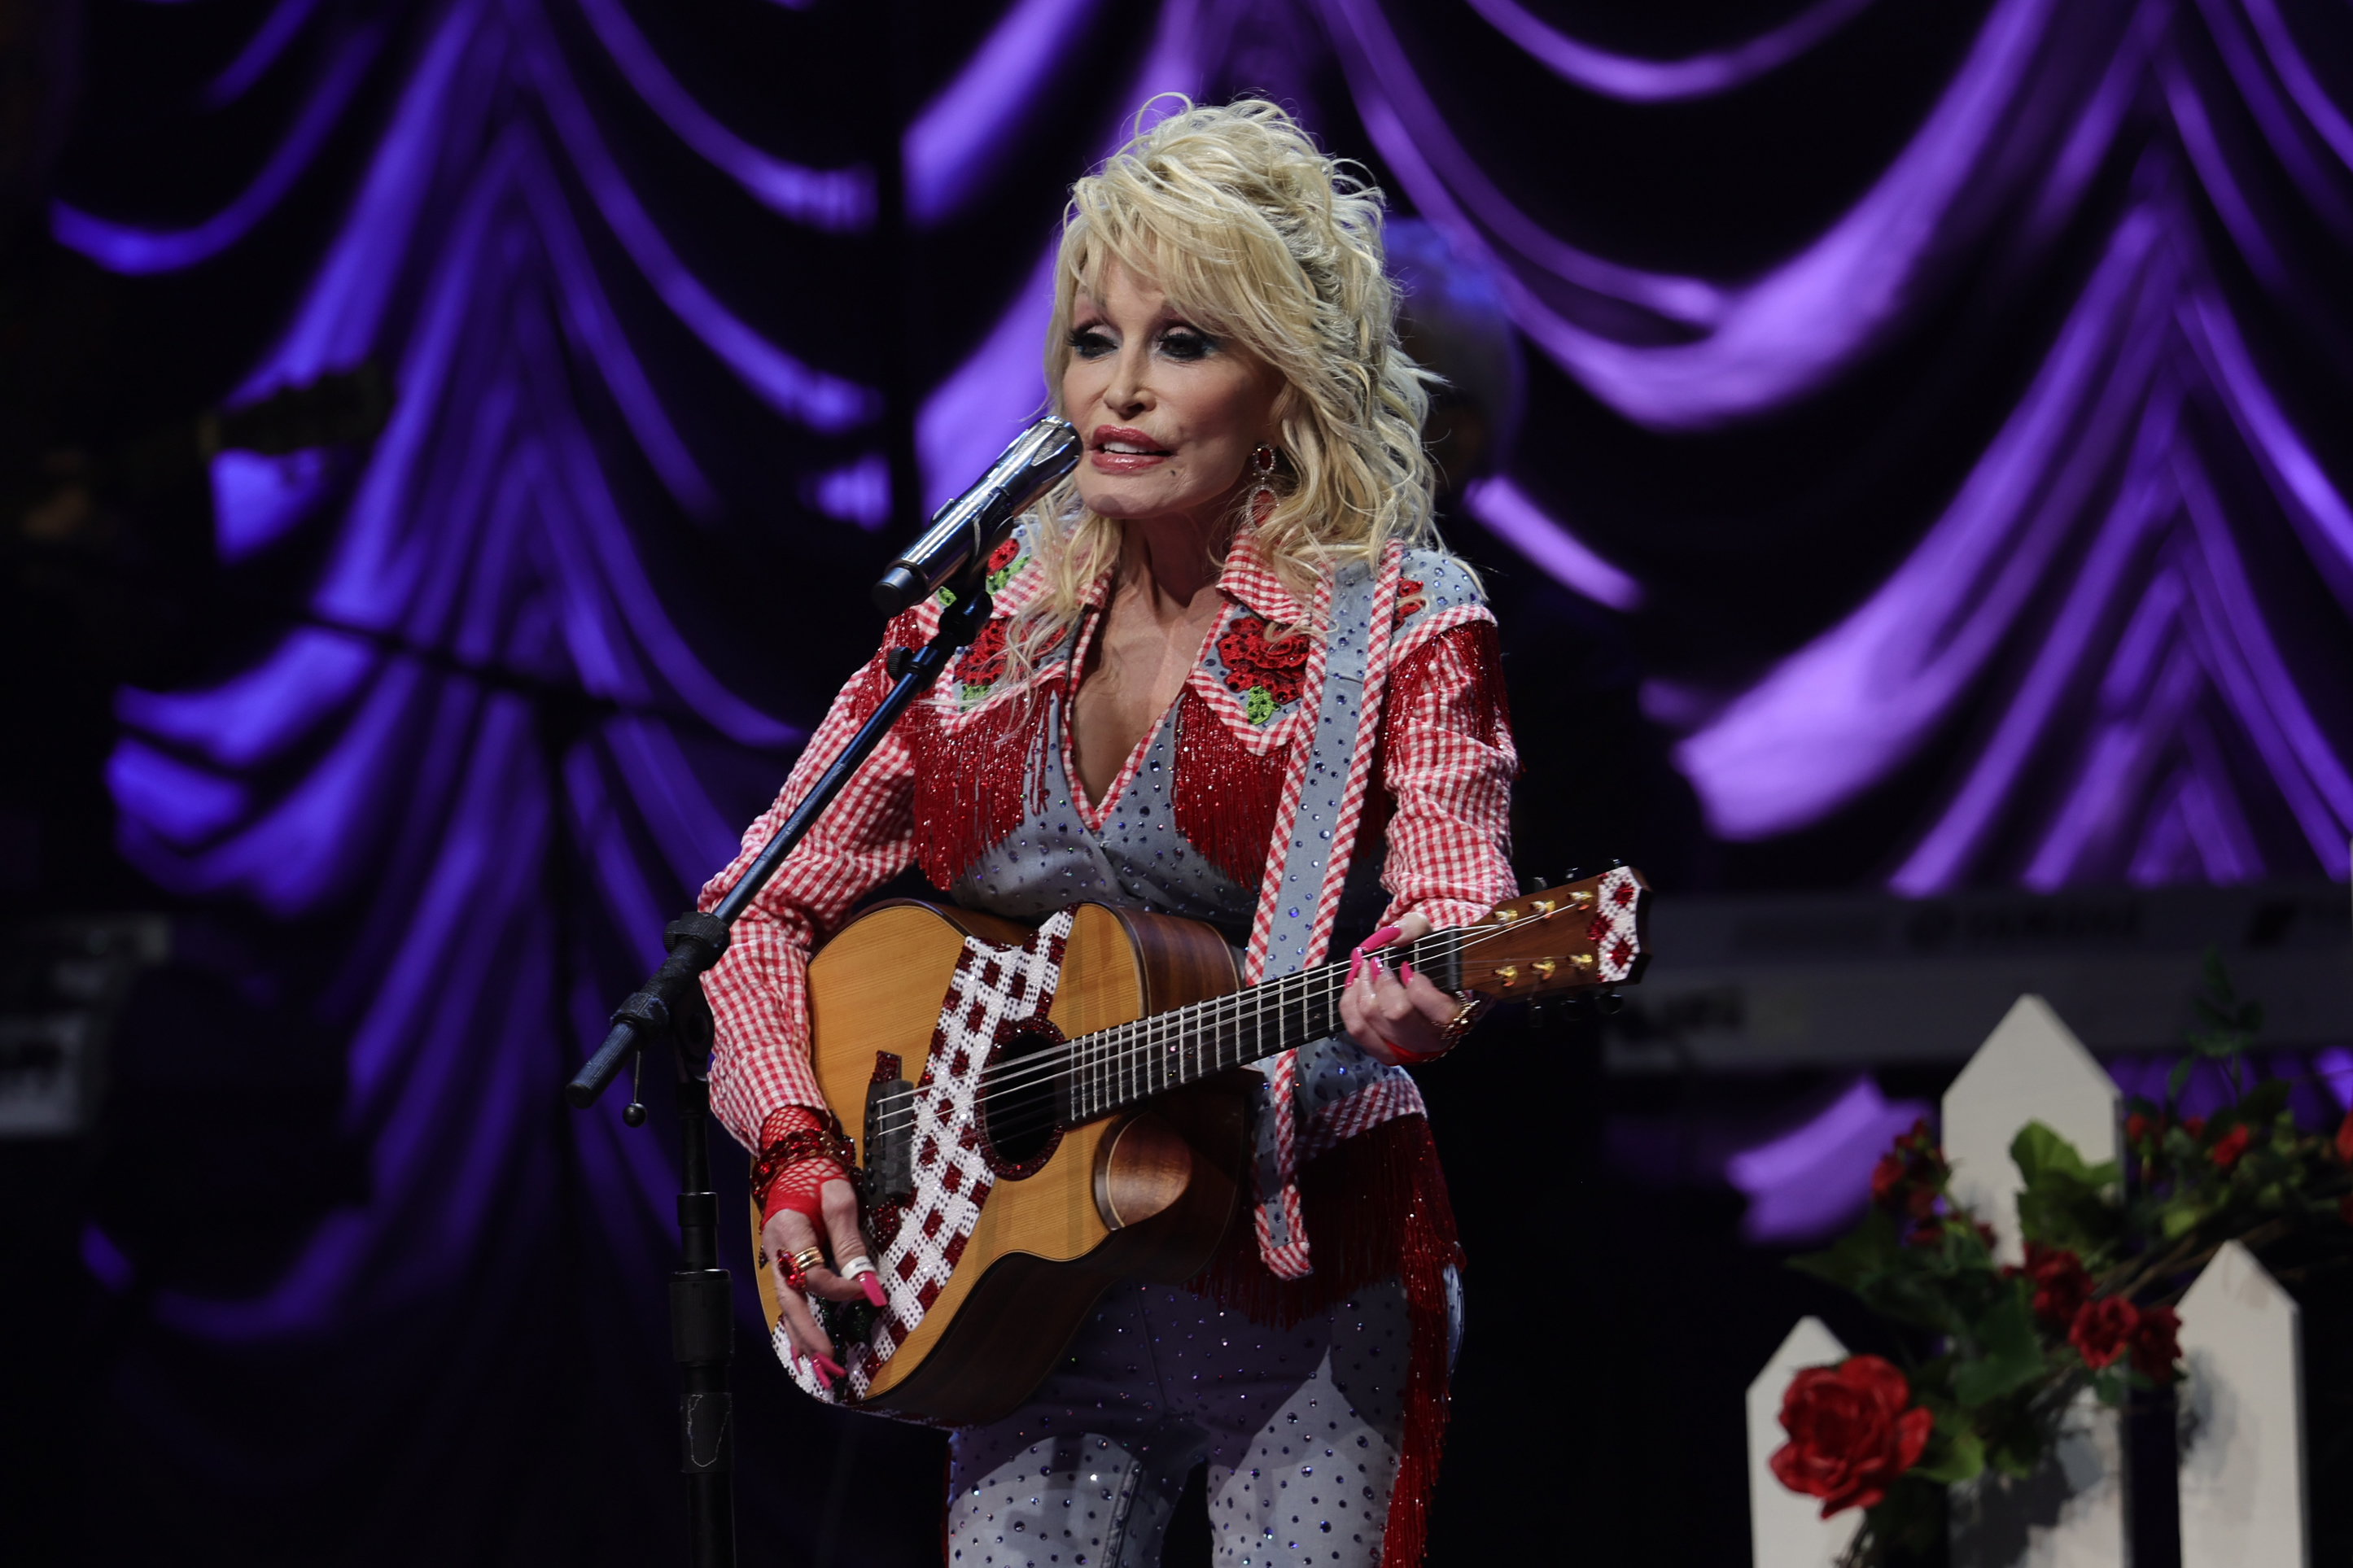 Dolly Parton performs on stage at ACL Live during Blockchain Creative Labs’ Dollyverse event at SXSW during the 2022 SXSW Conference and Festivals on March 18, 2022 in Austin, Texas